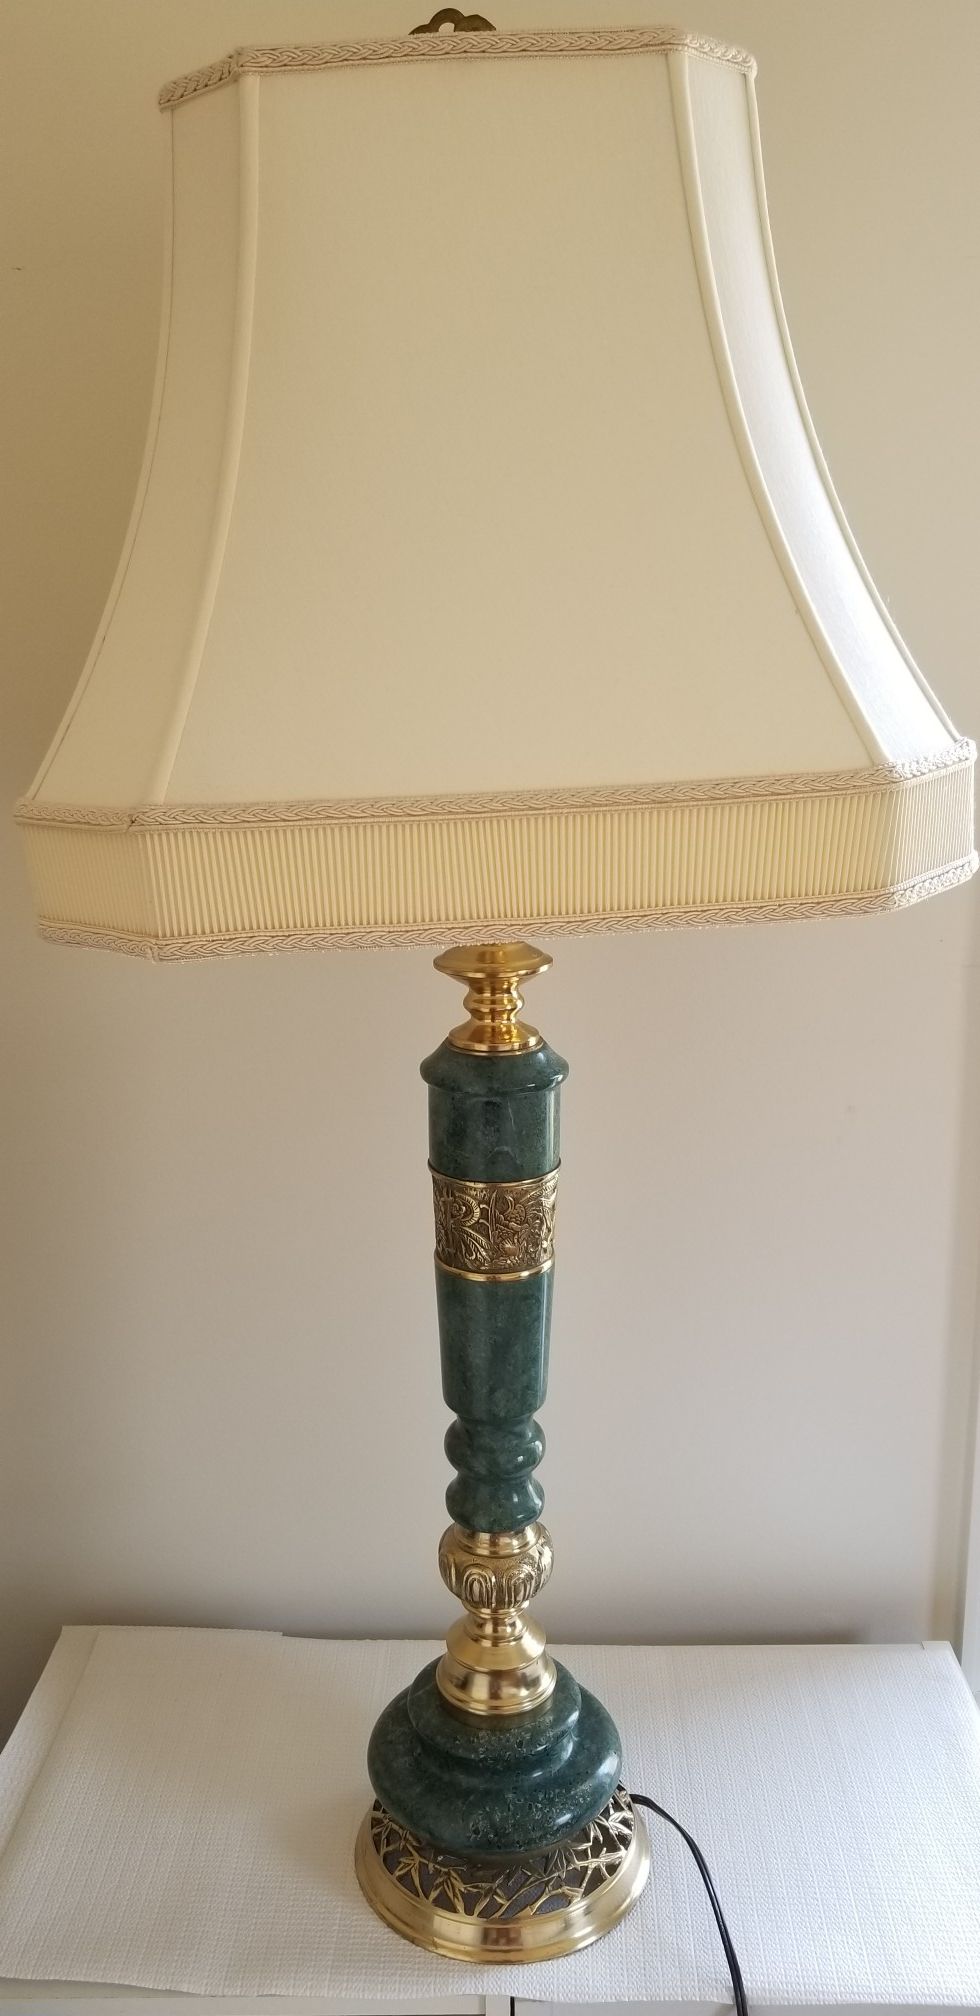 Lamp with green marble and gold stand